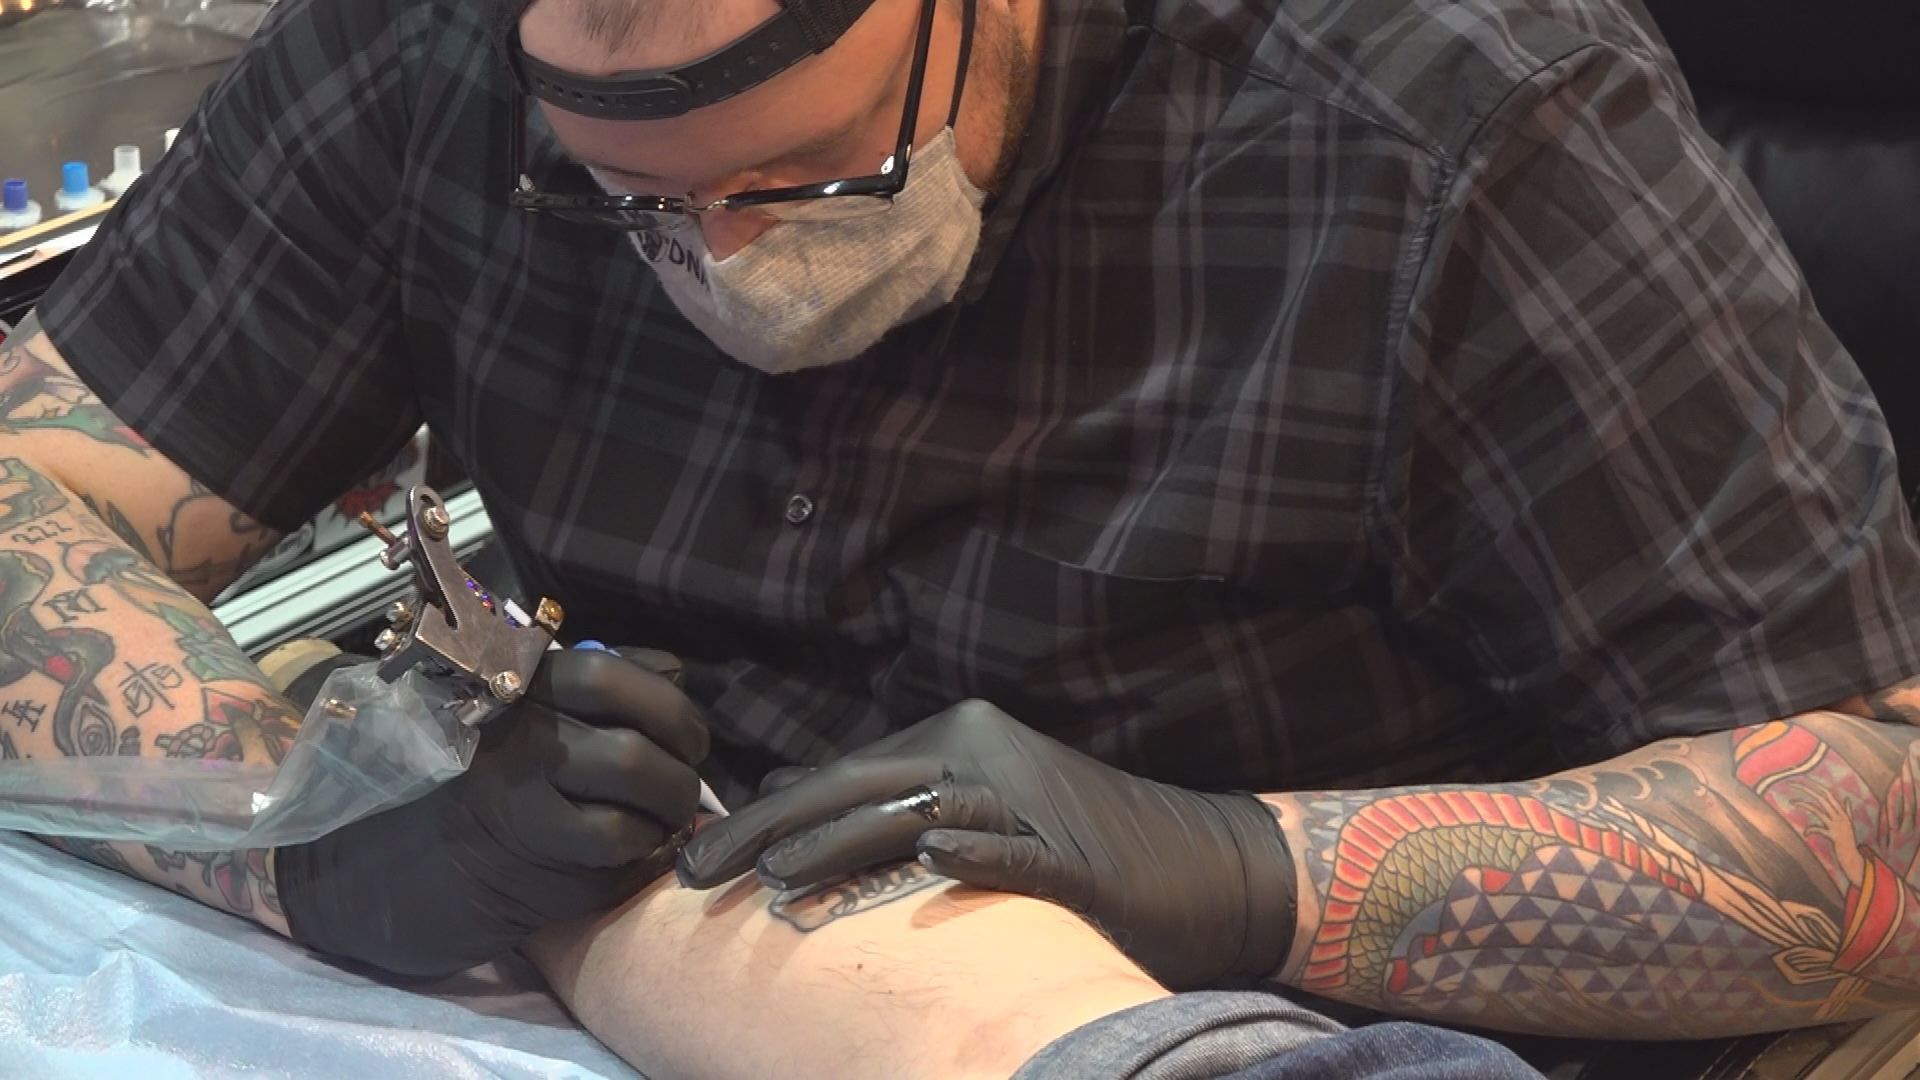 Pike County tattoo artist using new ink to cover 'old ideology' during BLM  movement